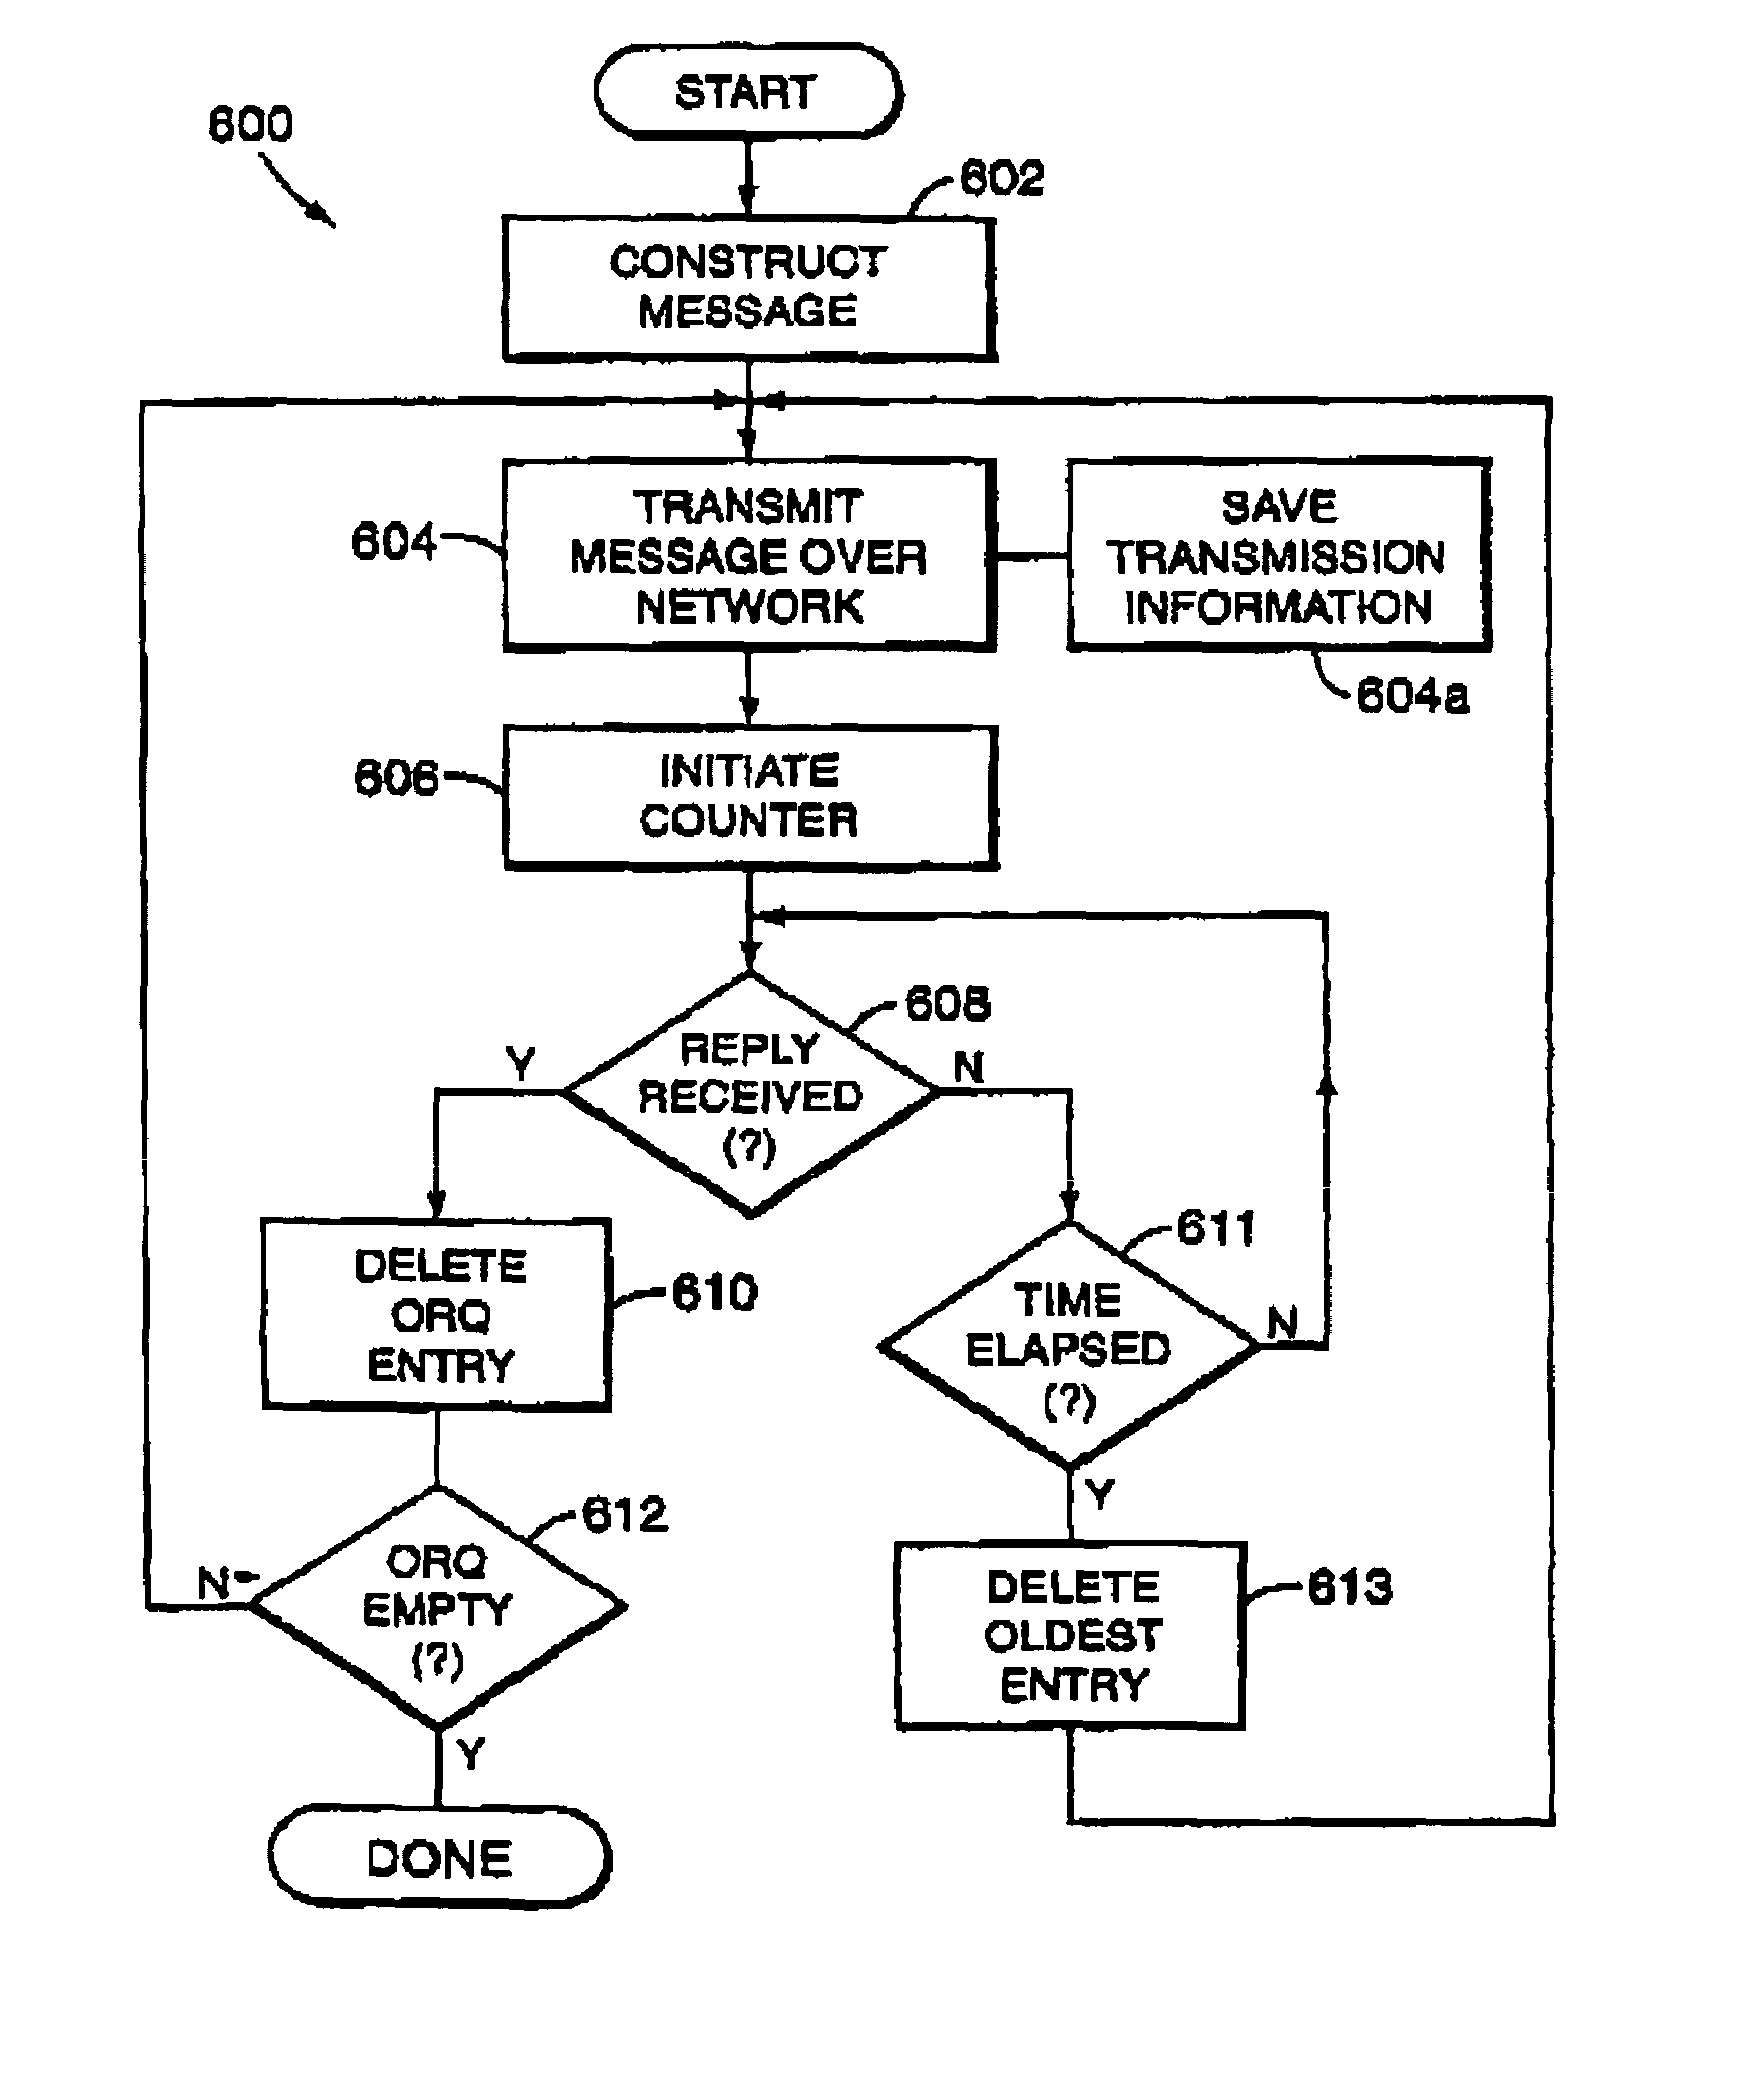 System and method for controlling network traffic flow in a multi-processor network